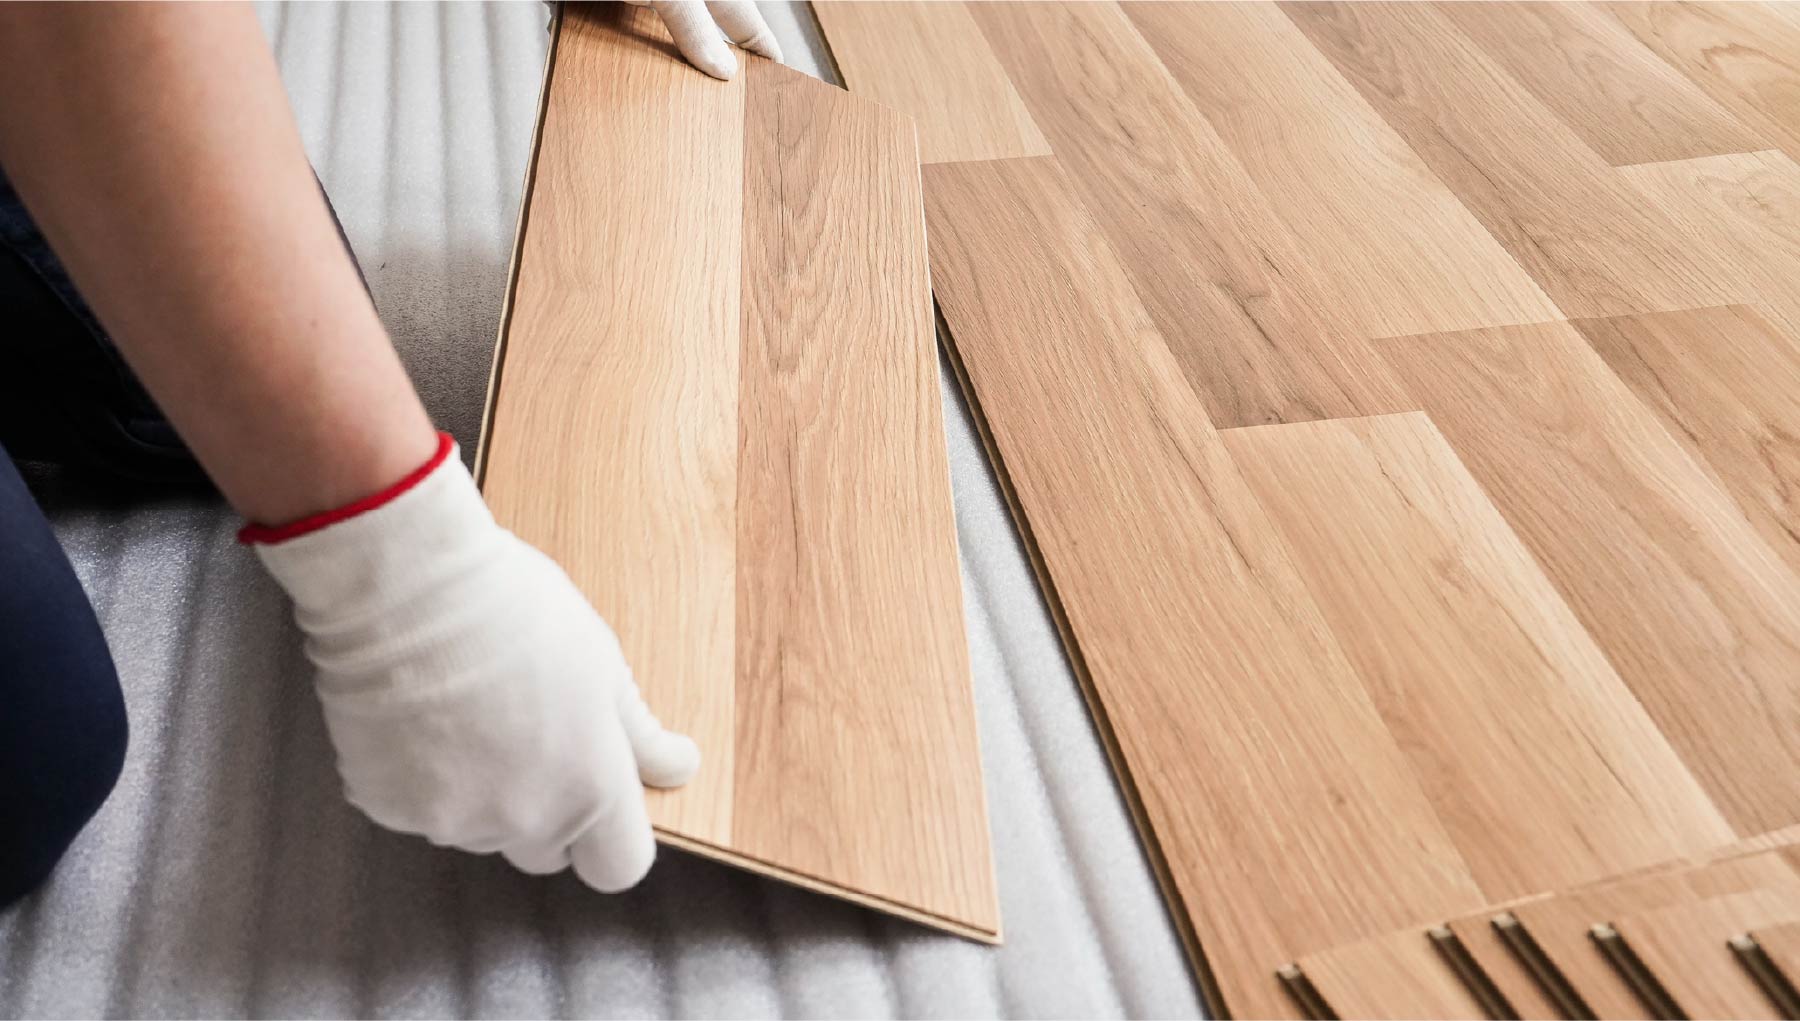 Laminate vs. Flooring: What's the Difference?